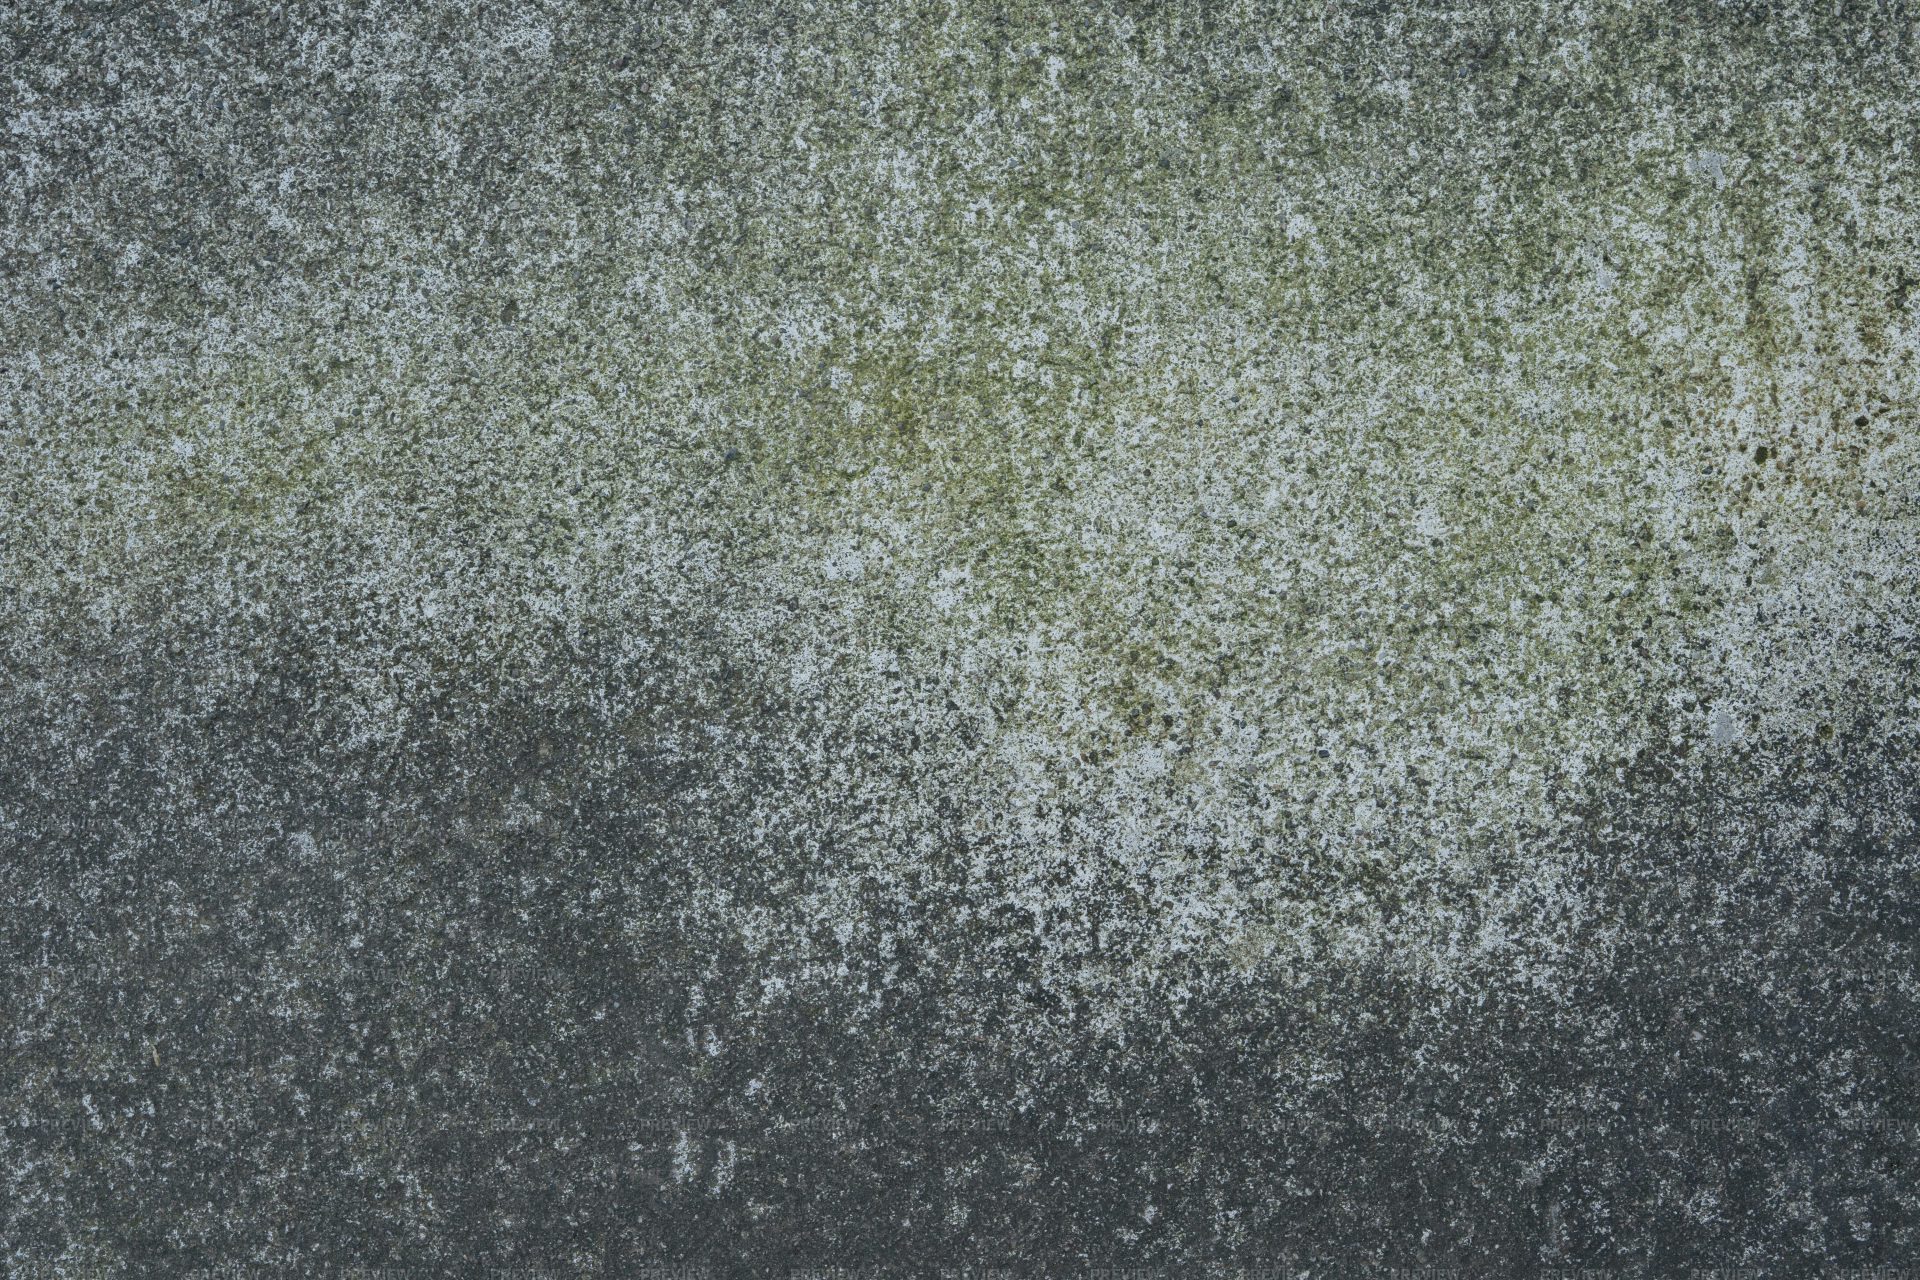 Cement Background - Stock Photos | Motion Array